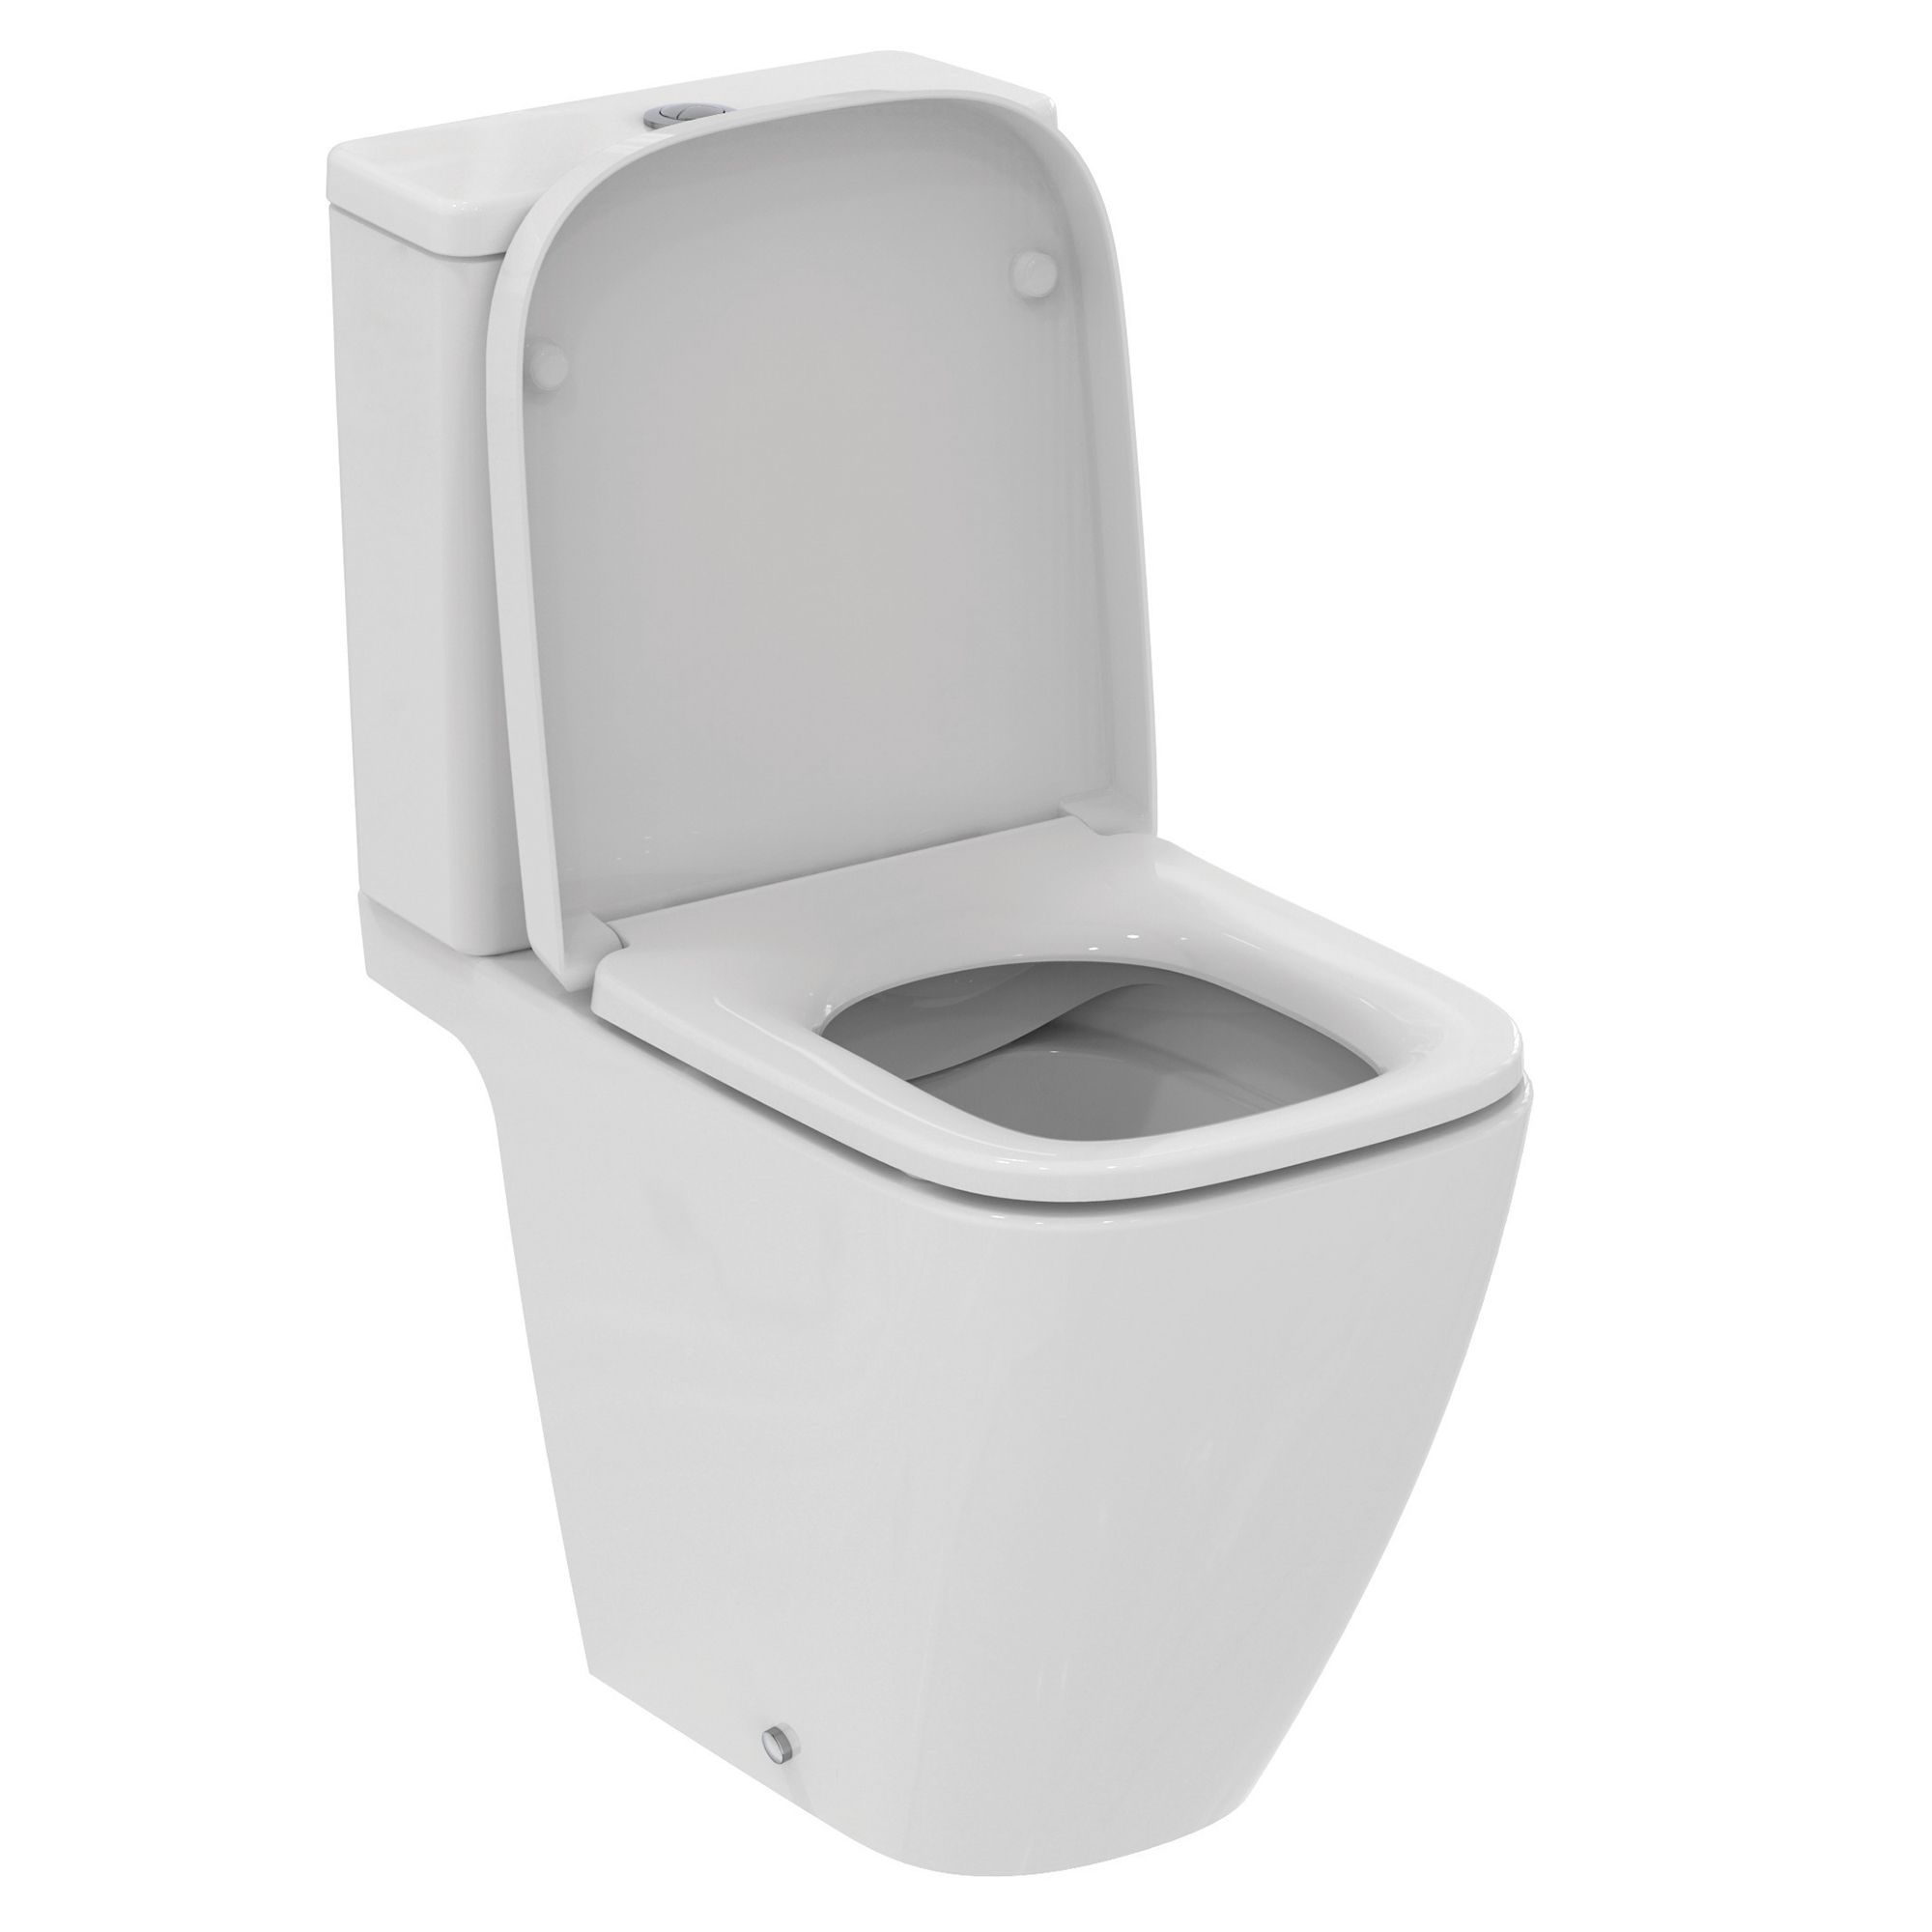 Ideal Standard i.life S White Standard Open back Square Close coupled Toilet set with Soft close seat